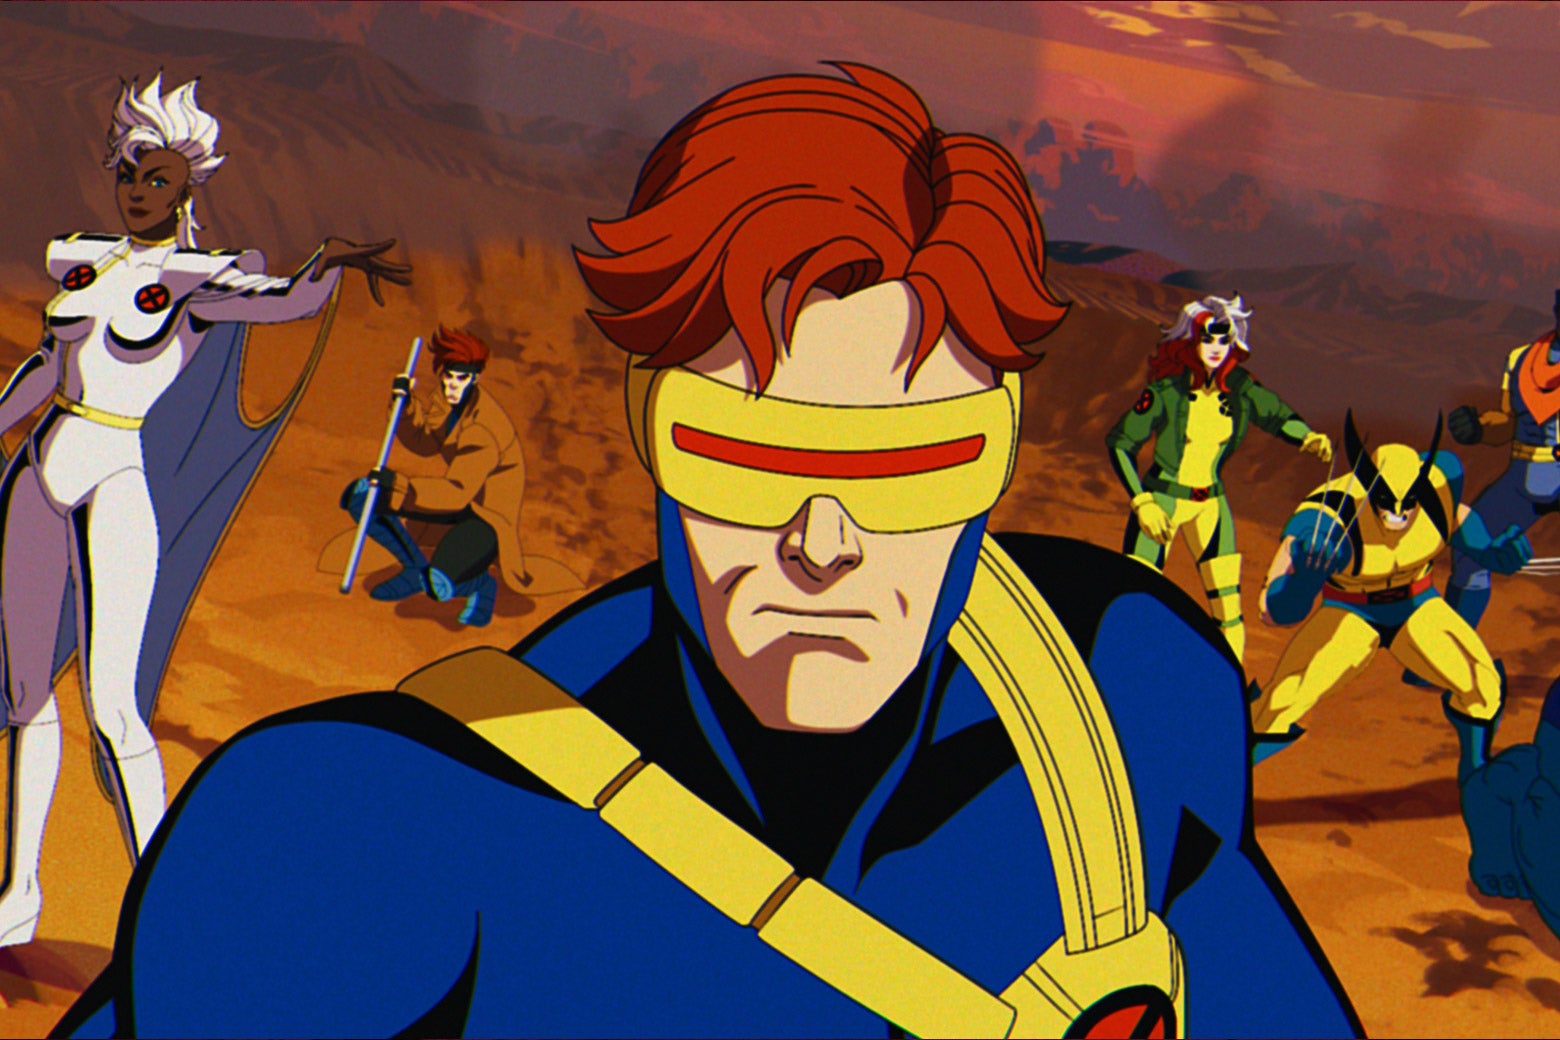 The X-Men in uniform, including Storm, Gambit, Rogue, and Wolverine, and Cyclops front and center.